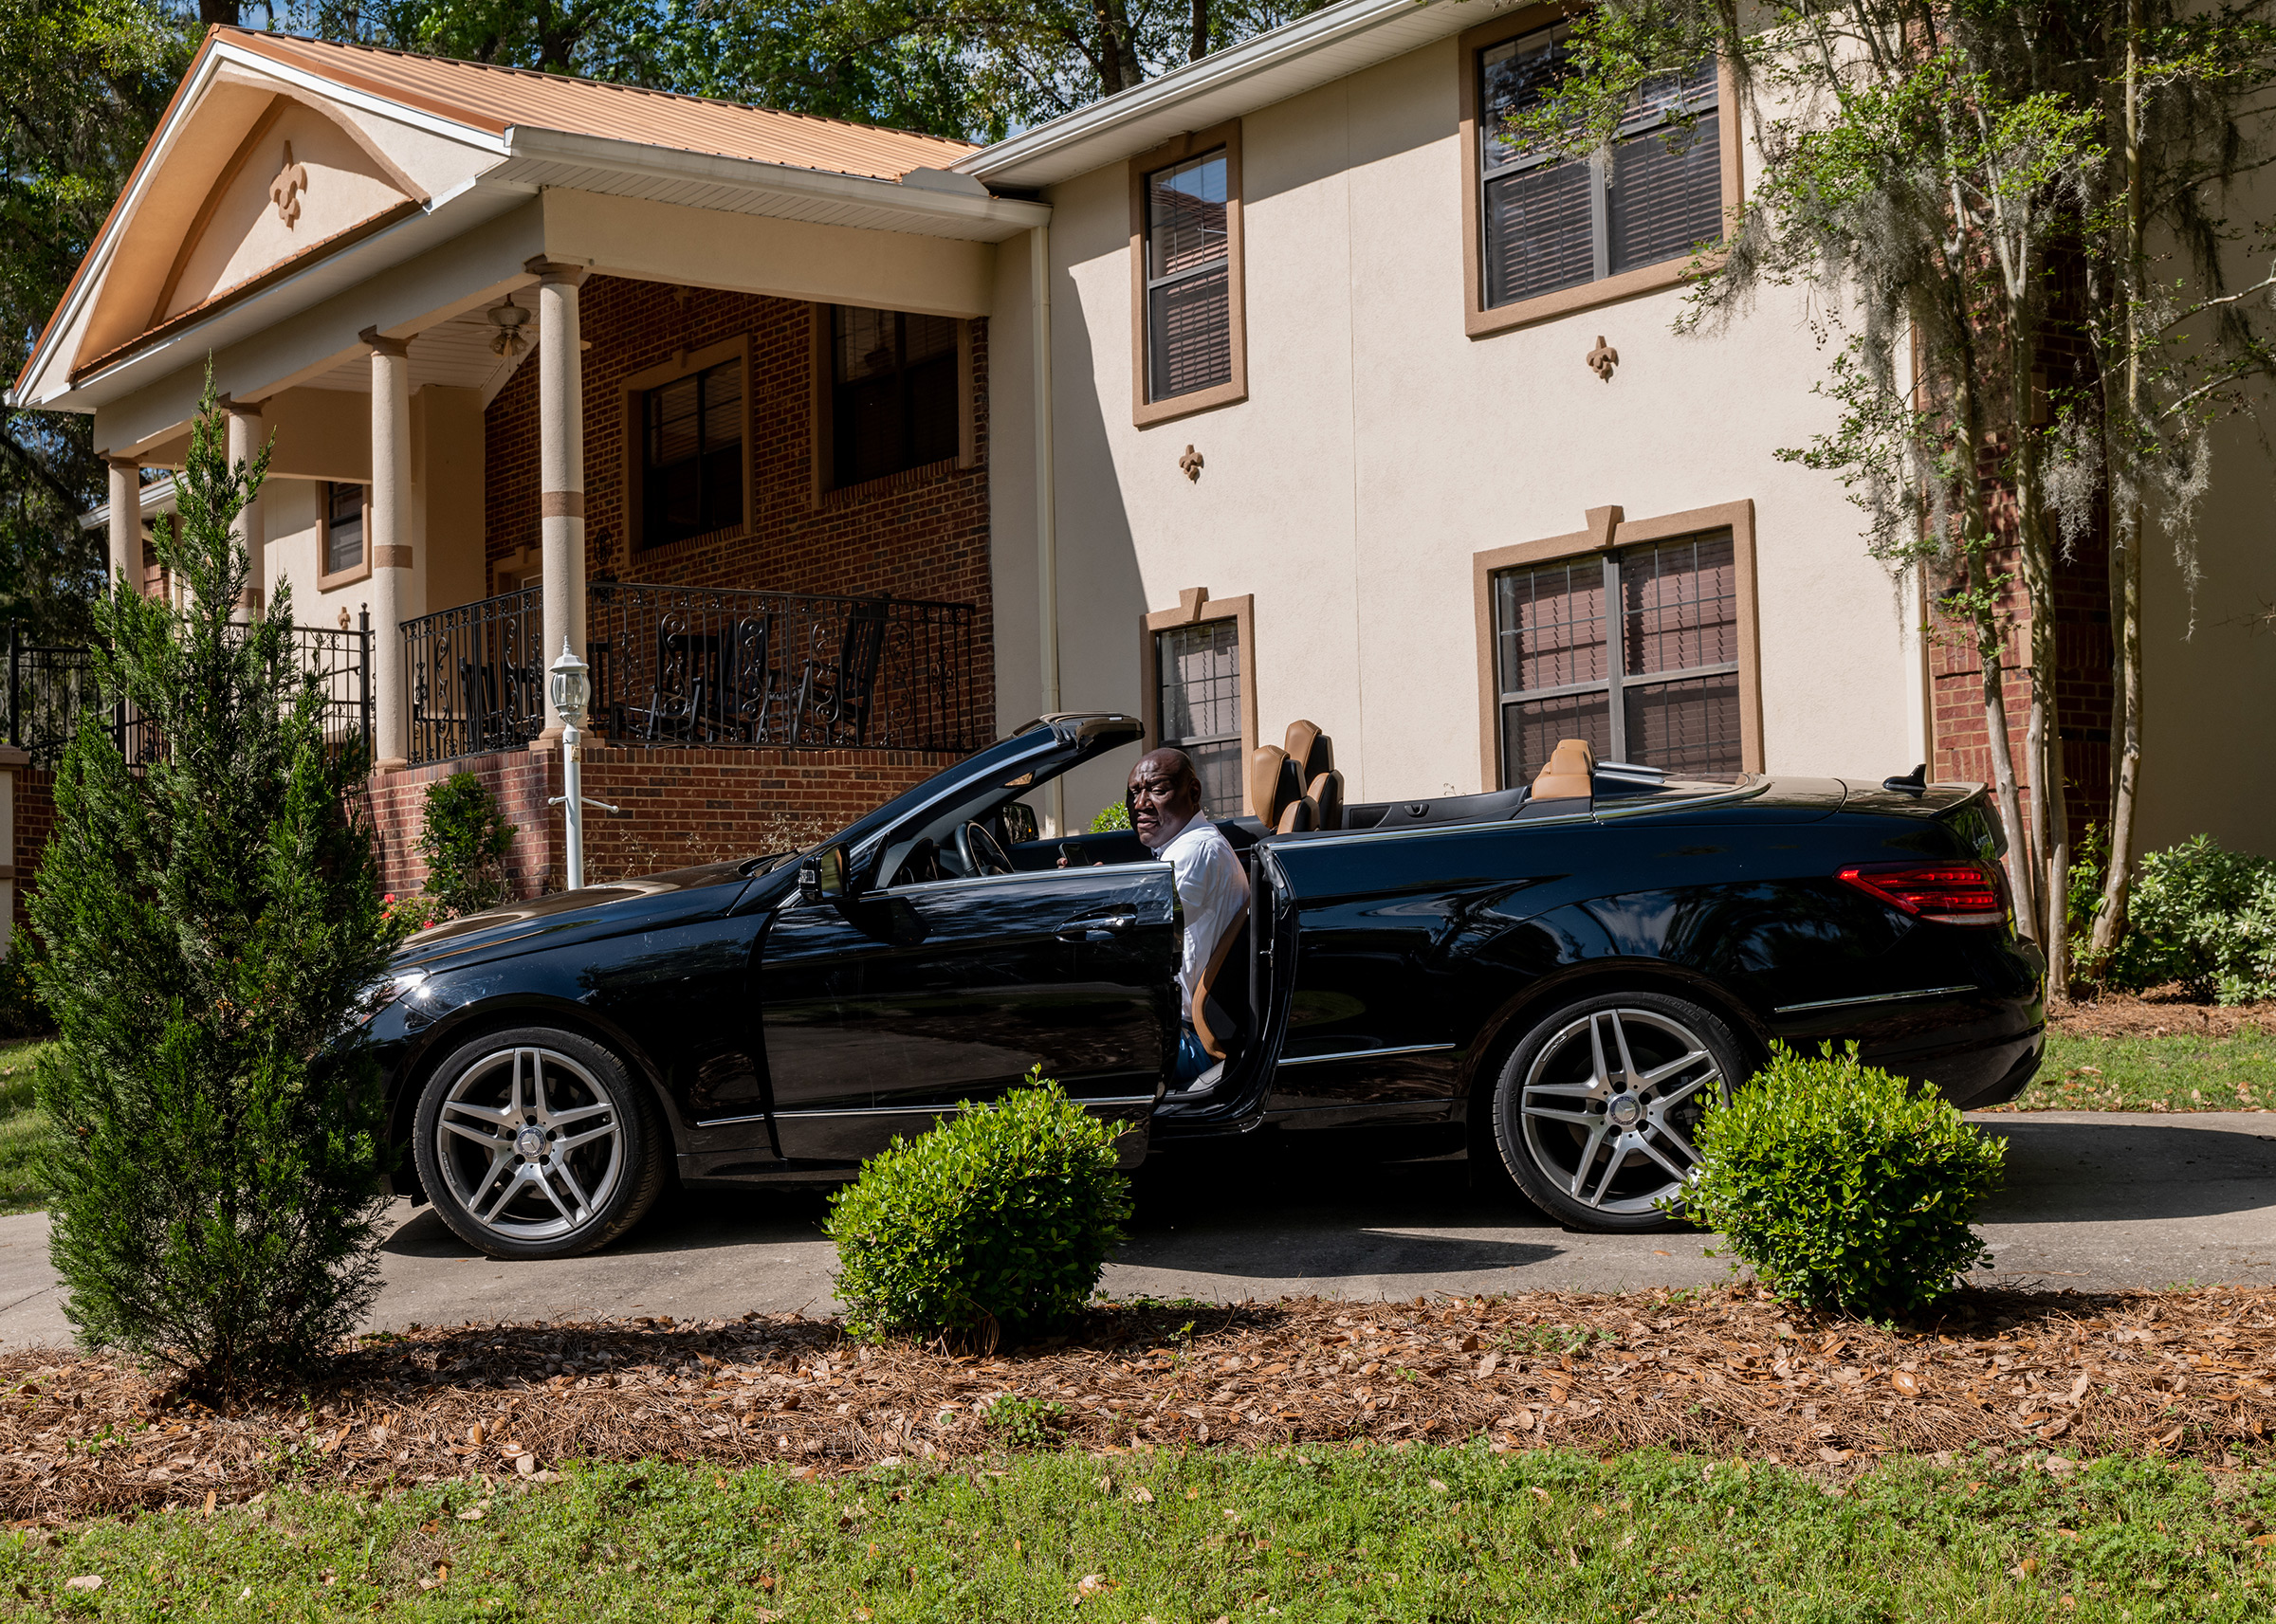 Crump in his driveway in Tallahassee, Fla., on April 4.